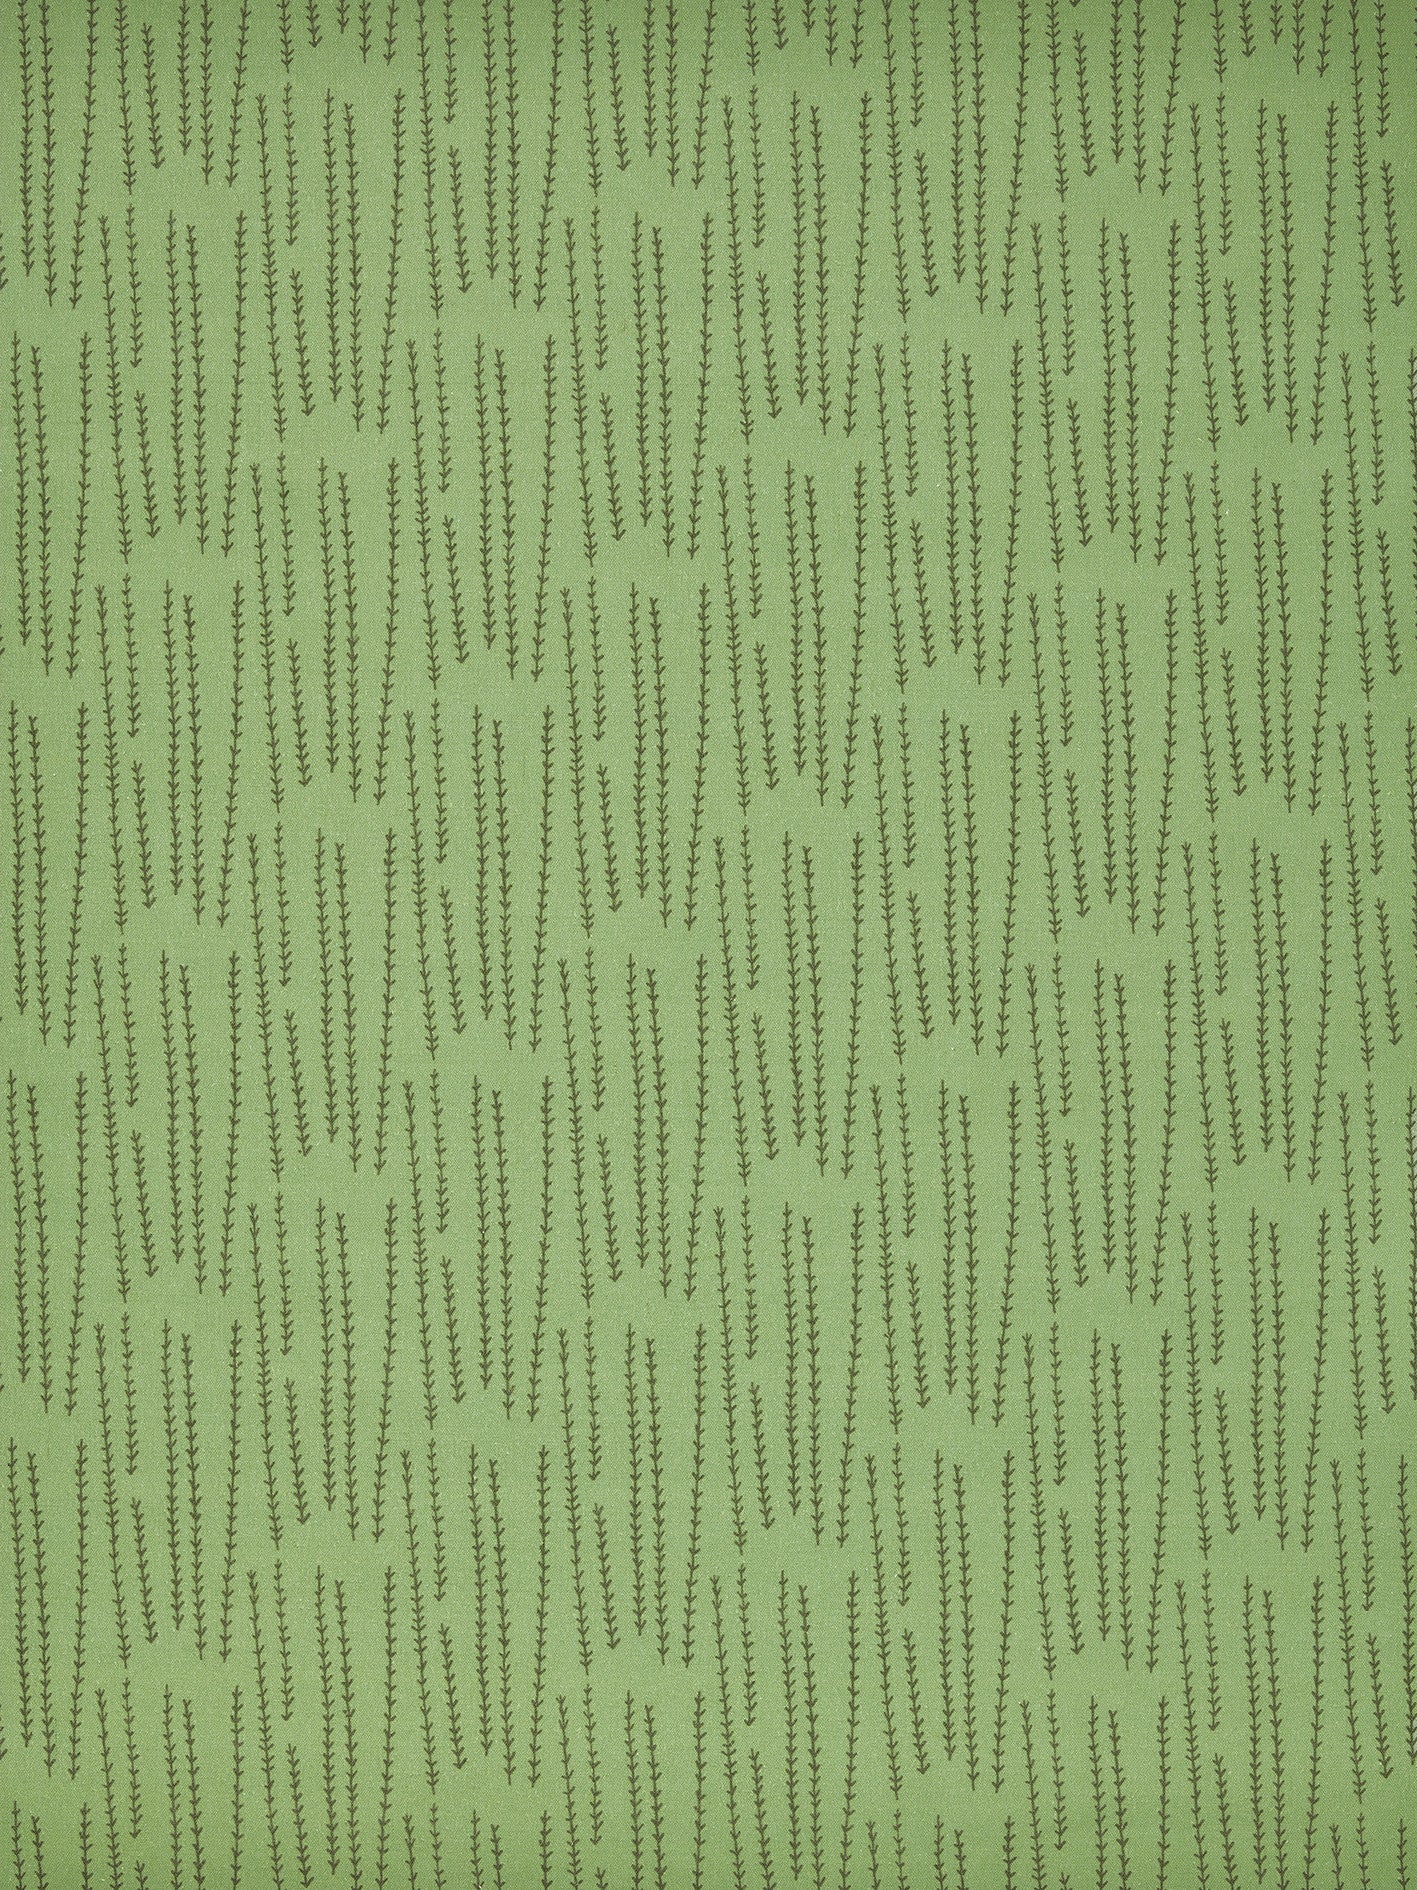 Graphic Rosemary Sprig Pattern Printed Linen Cotton Canvas Home Decor Fabric by the meter or the yard for curtains, blinds or upholstery in Light Avocado Green & Olive Green ships from Canada (USA)